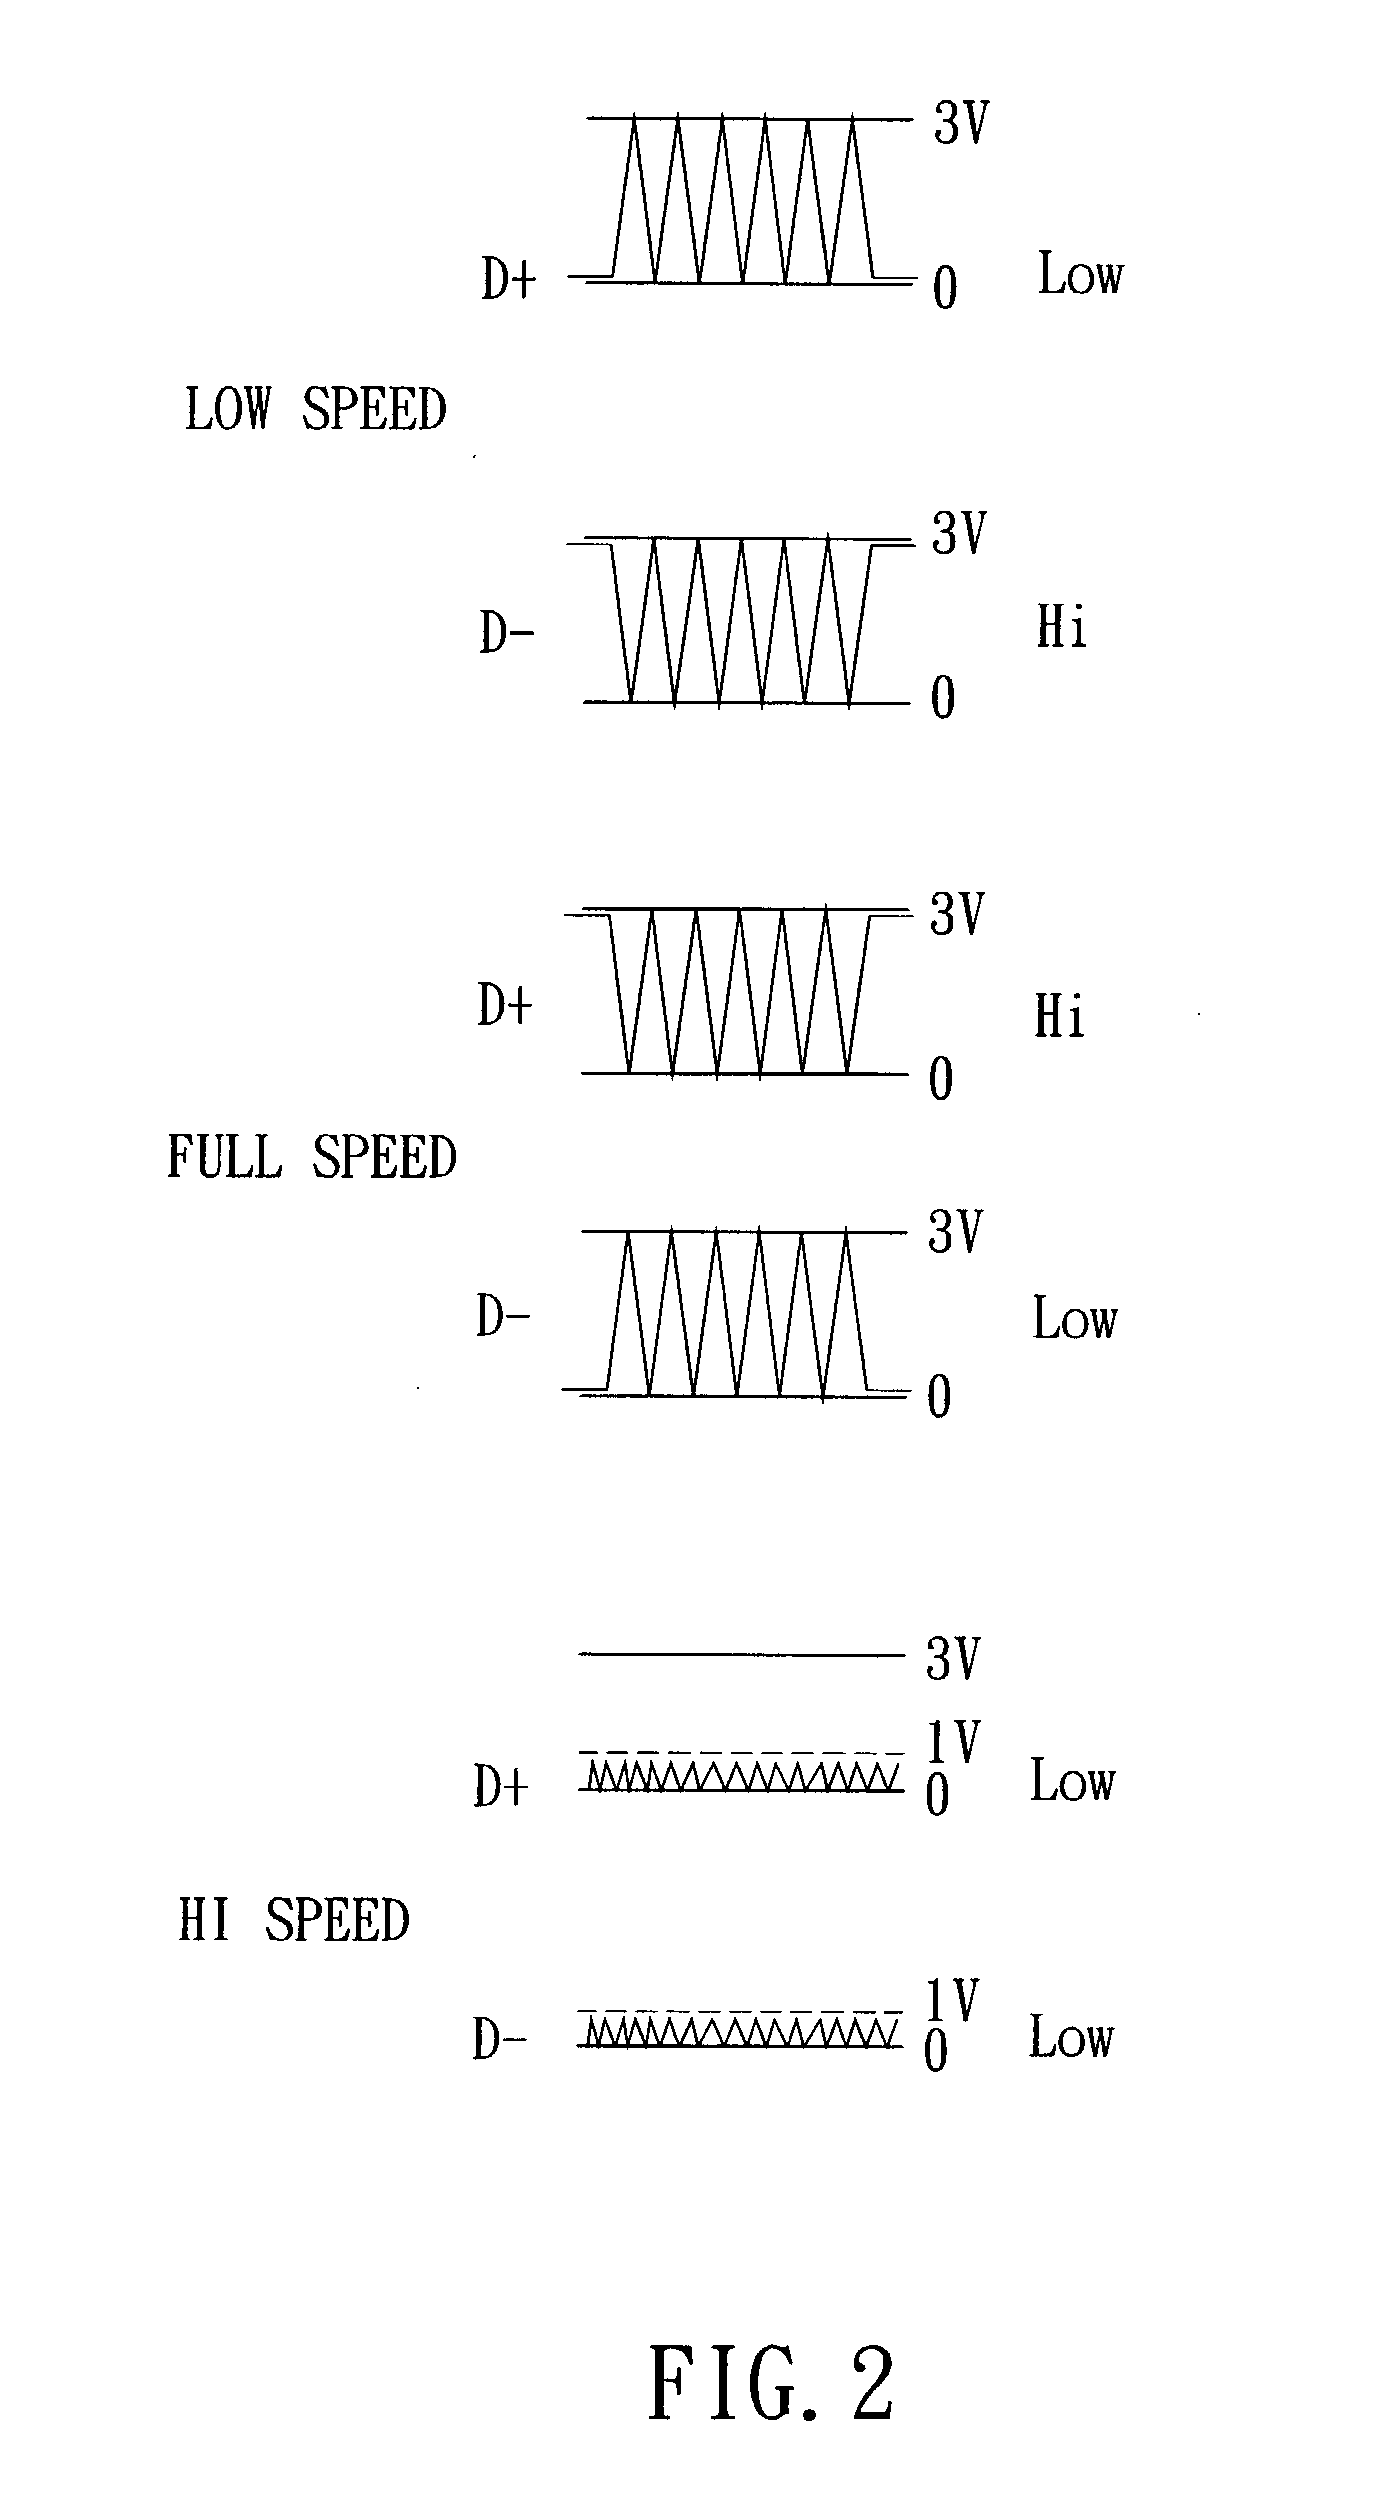 Apparatus for USB interface identification